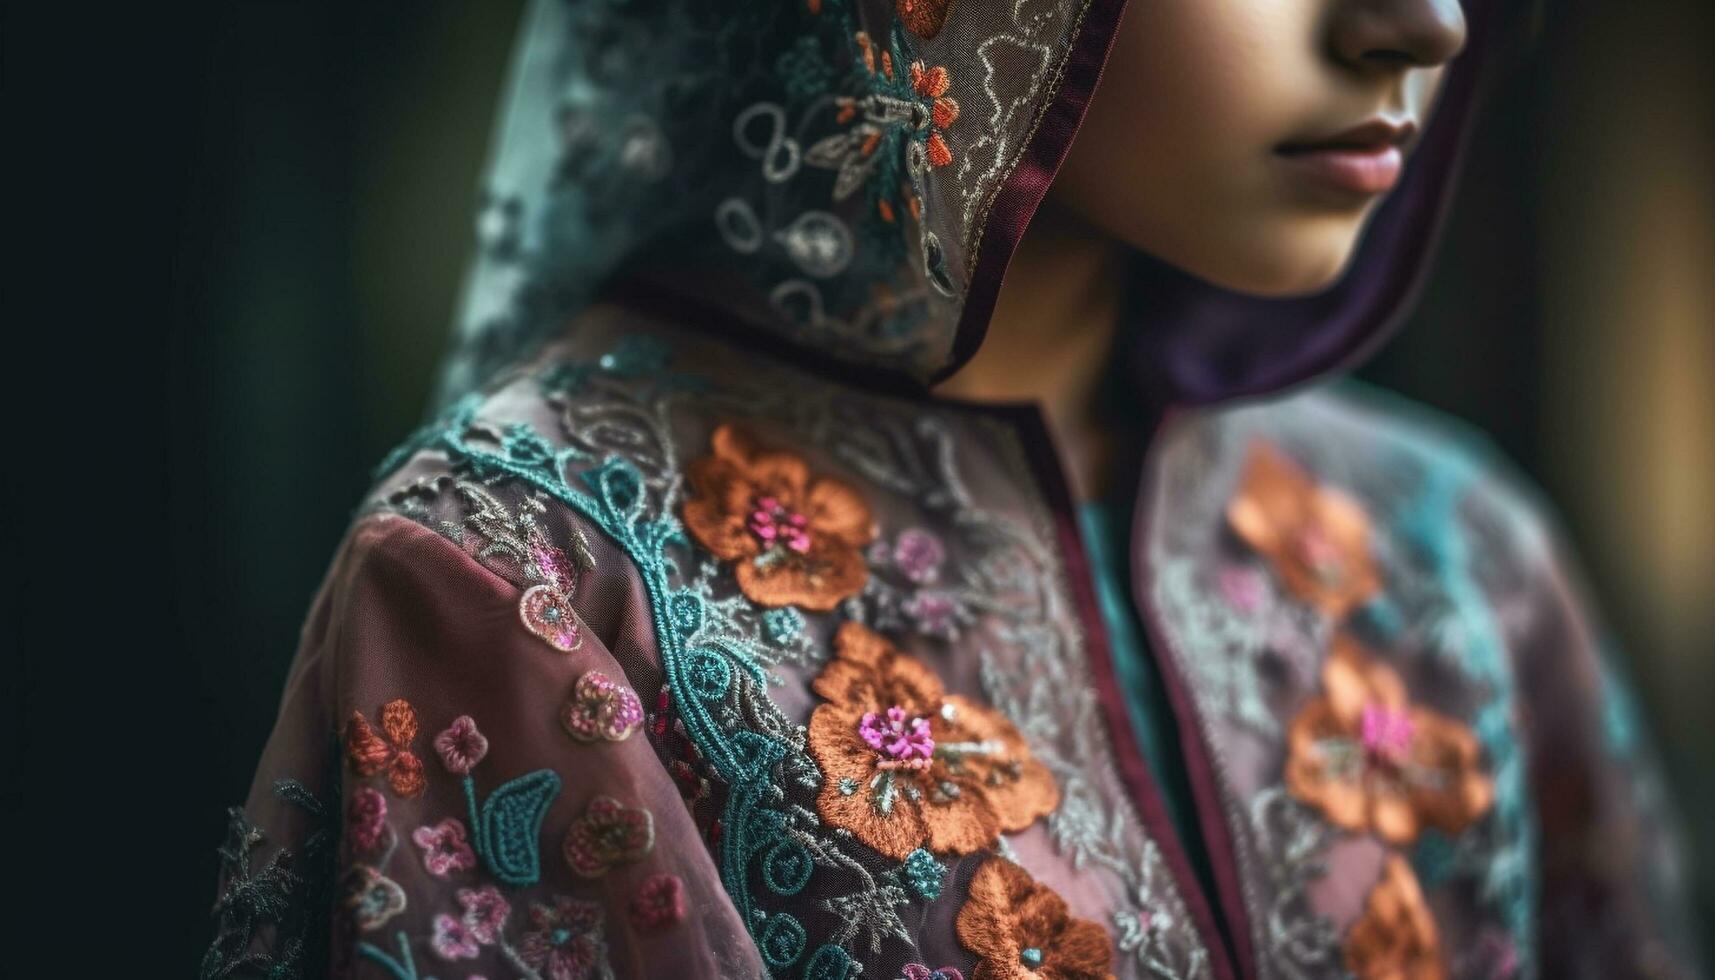 One young woman in traditional clothing wears a mysterious hijab generated by AI photo